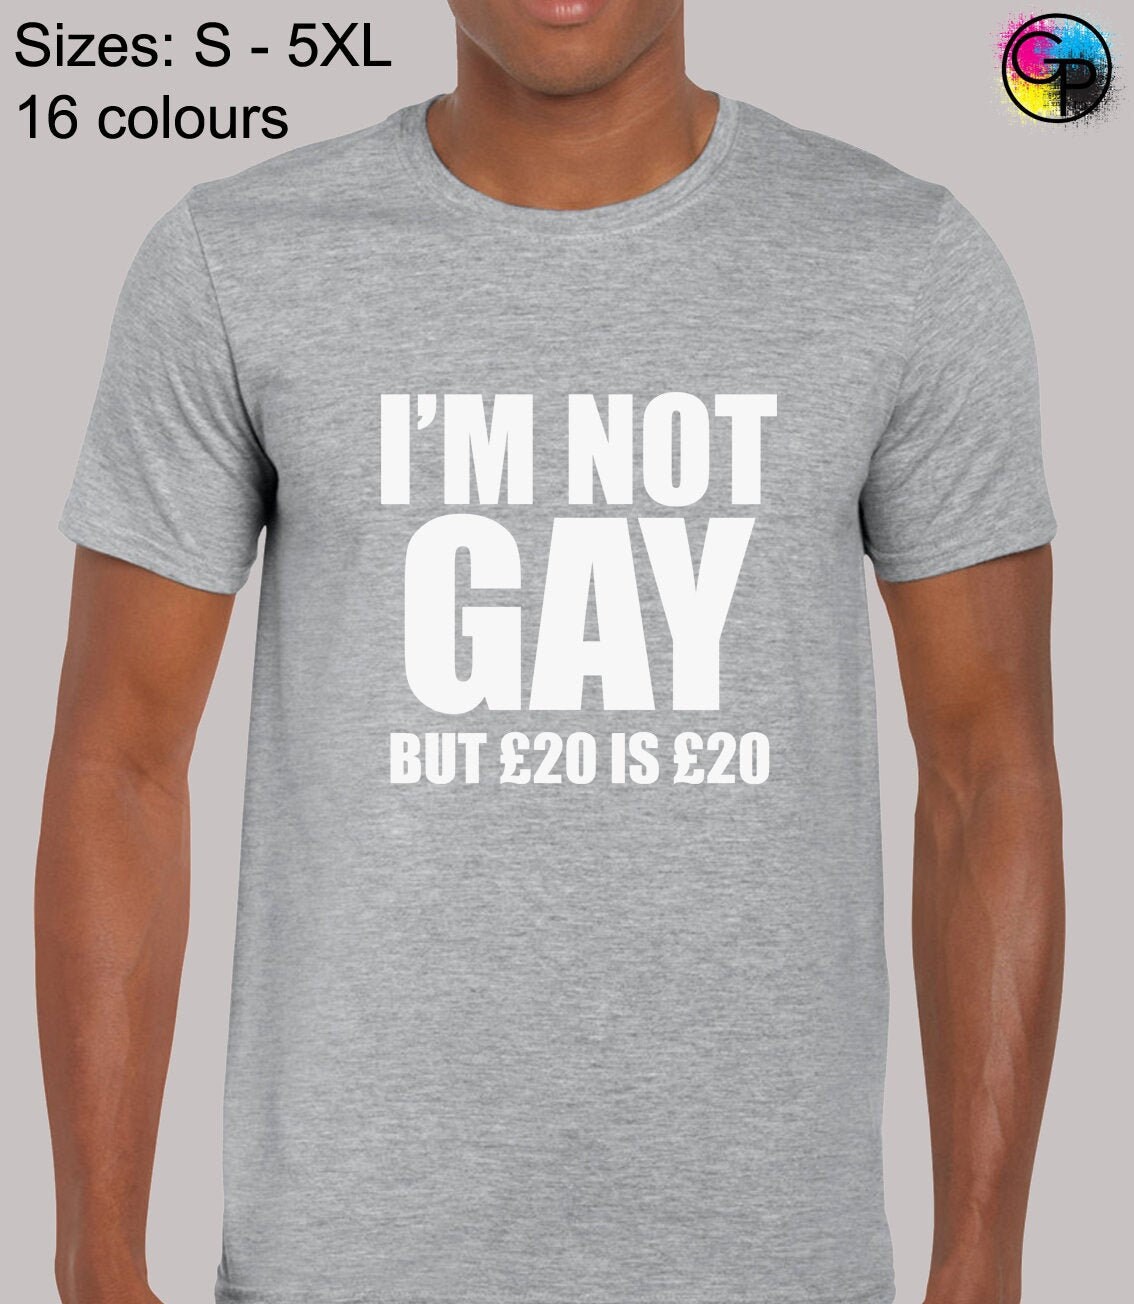 Details about   I'm Not Gay But 20 Quid Is 20 Quid Tshirt Unisex Funny Humour 